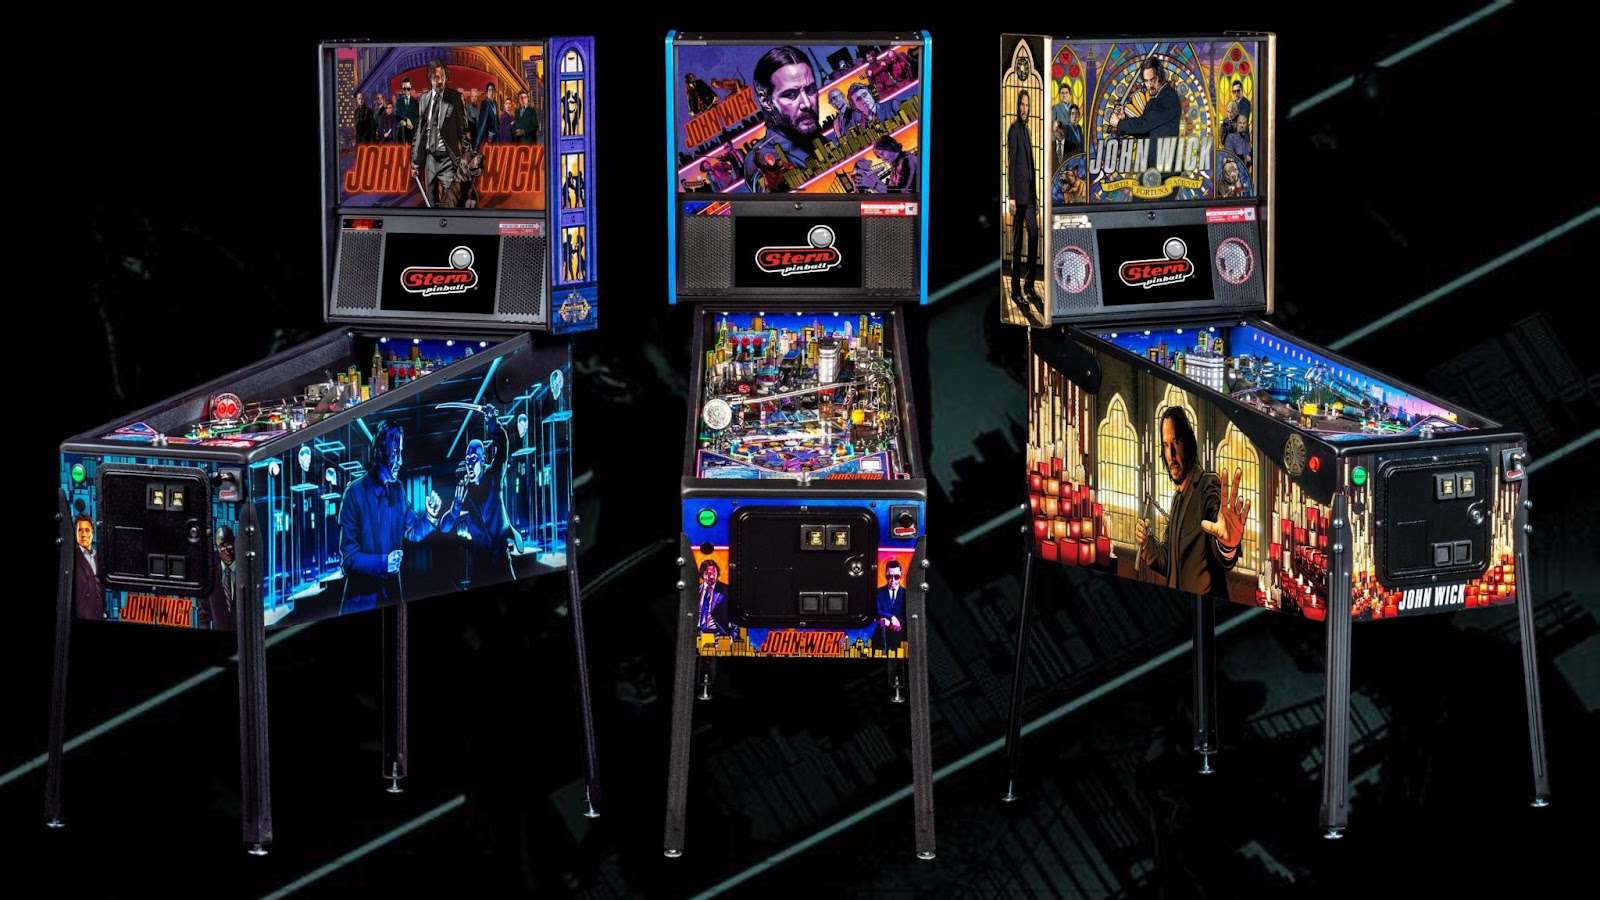 The New John Wick Pinball Games to Take Over Homes and Arcades Across the Globe